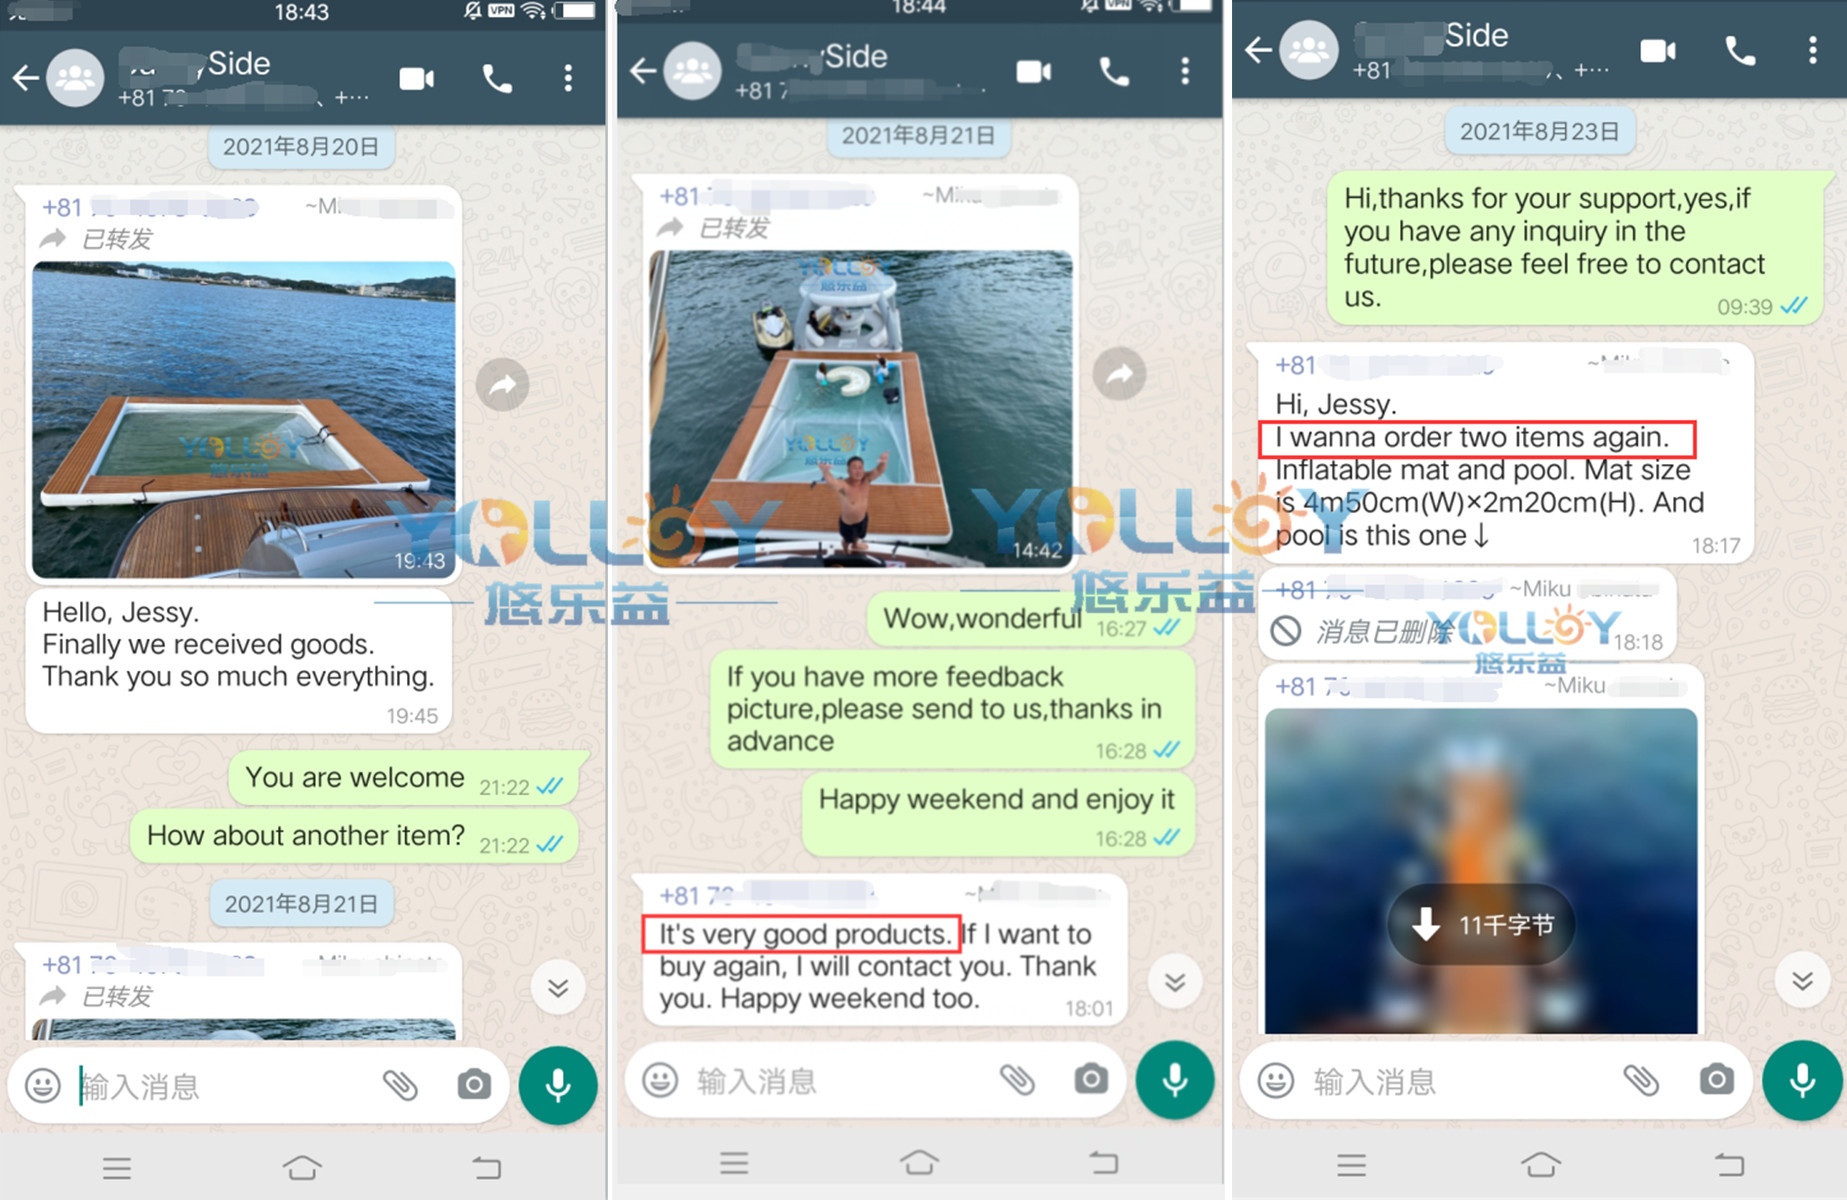 client's feedback of yacht pool with anti-jellyfish net